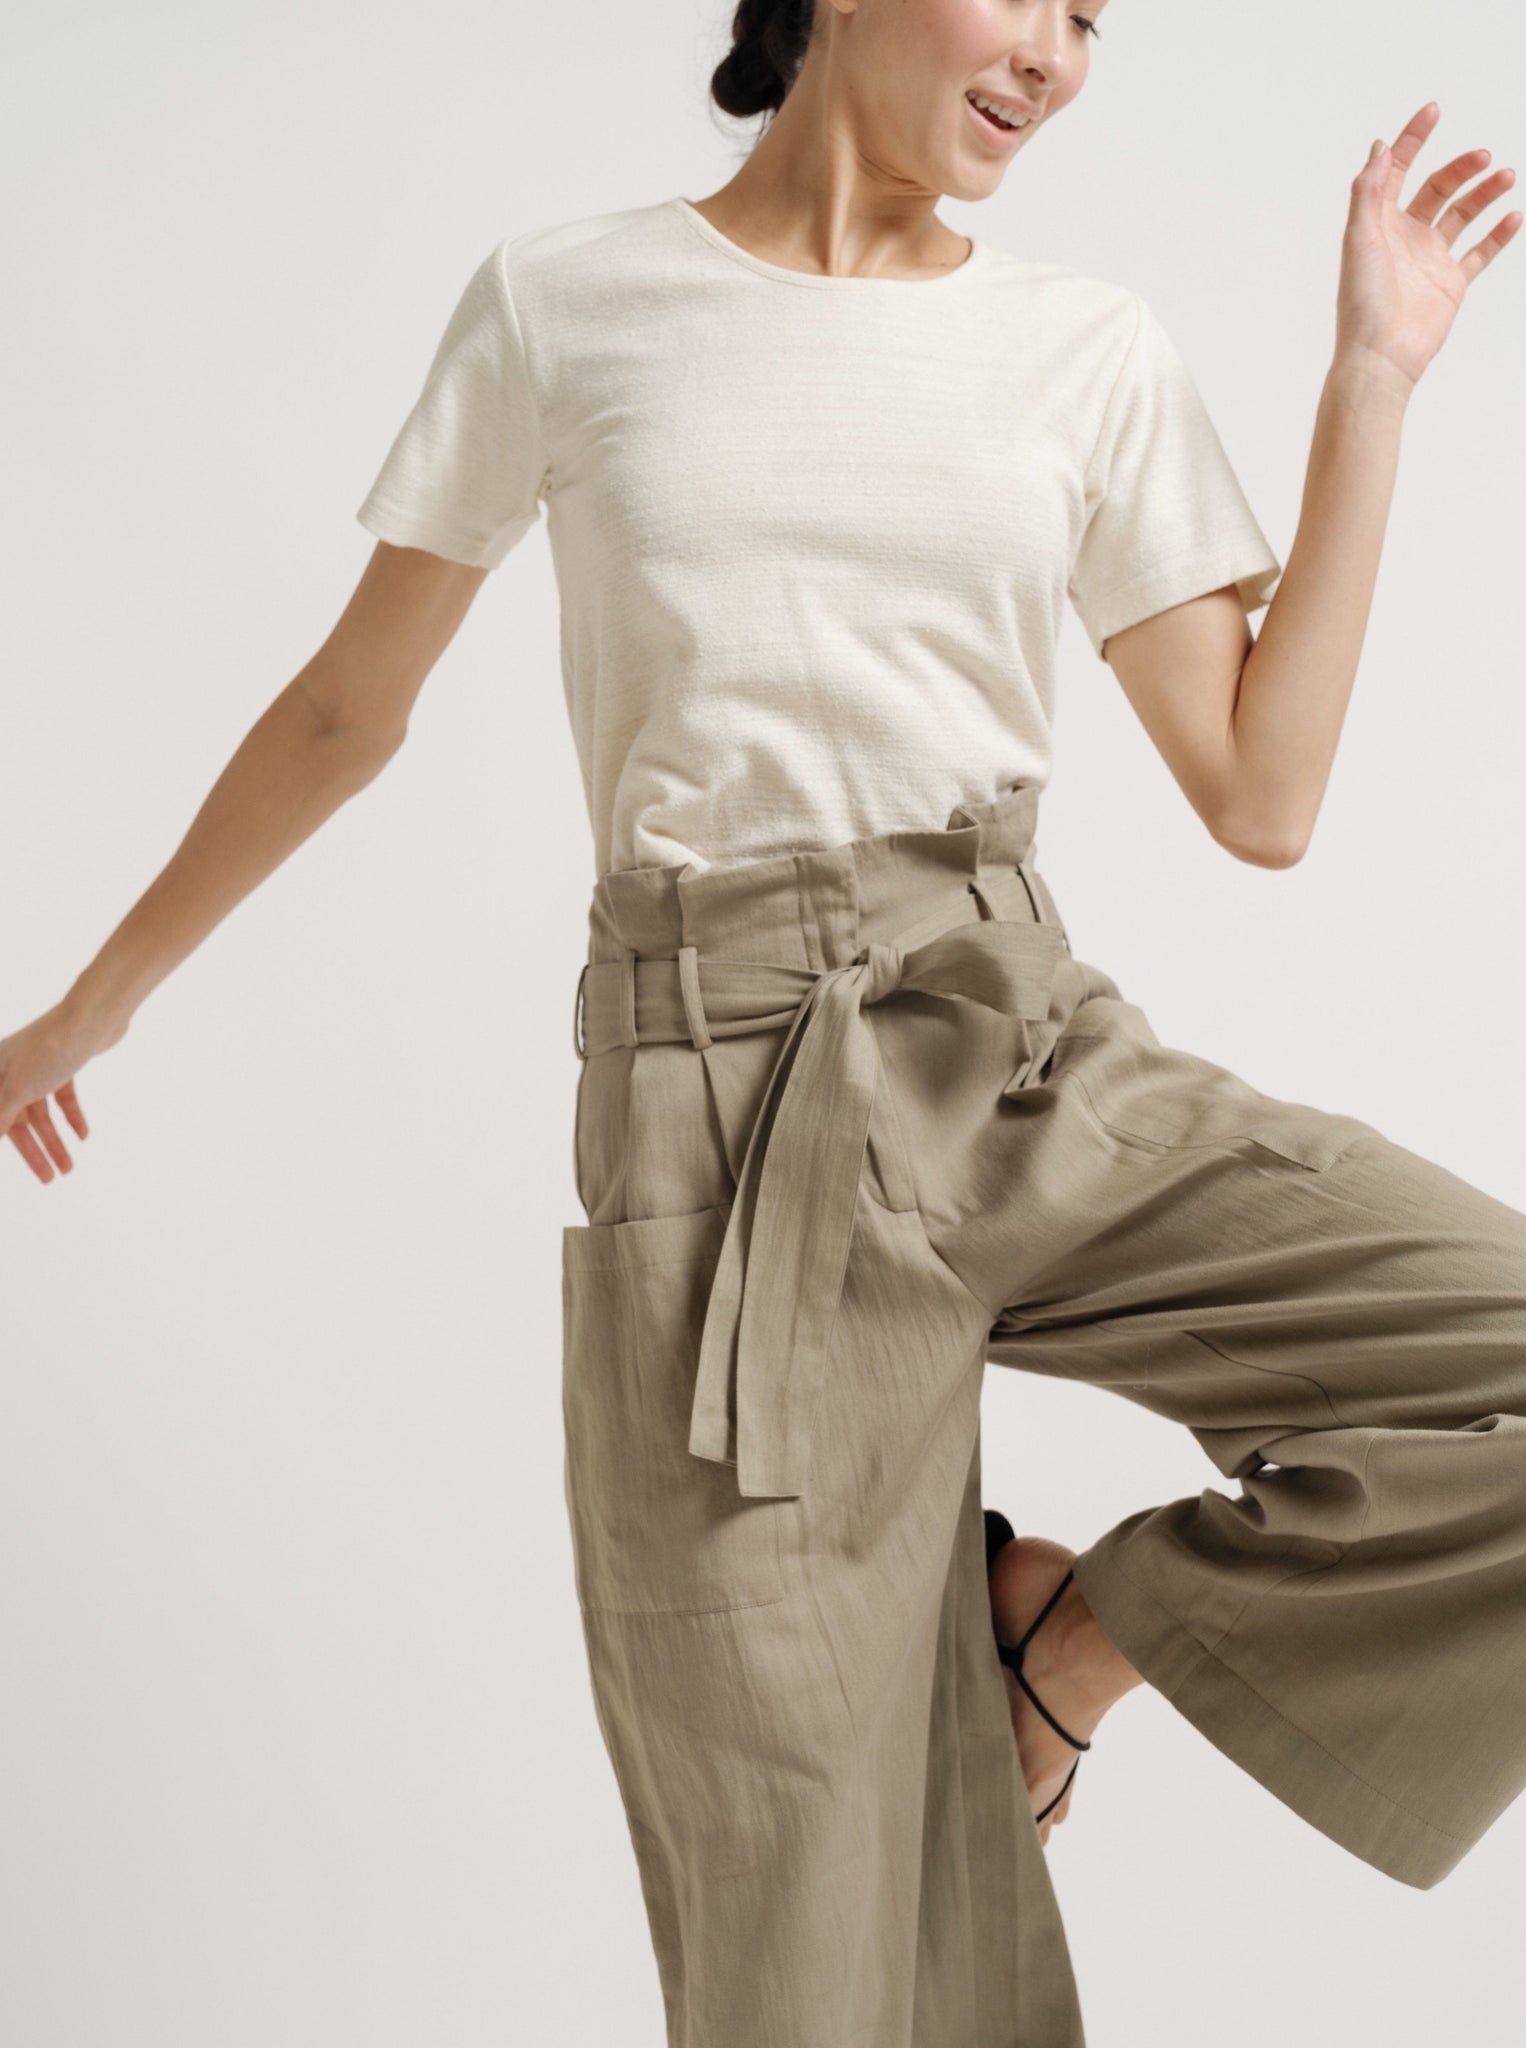 A woman wearing Paper Bag Pant - Putty - Pre-order in khaki cotton sateen fabric and a white t-shirt.